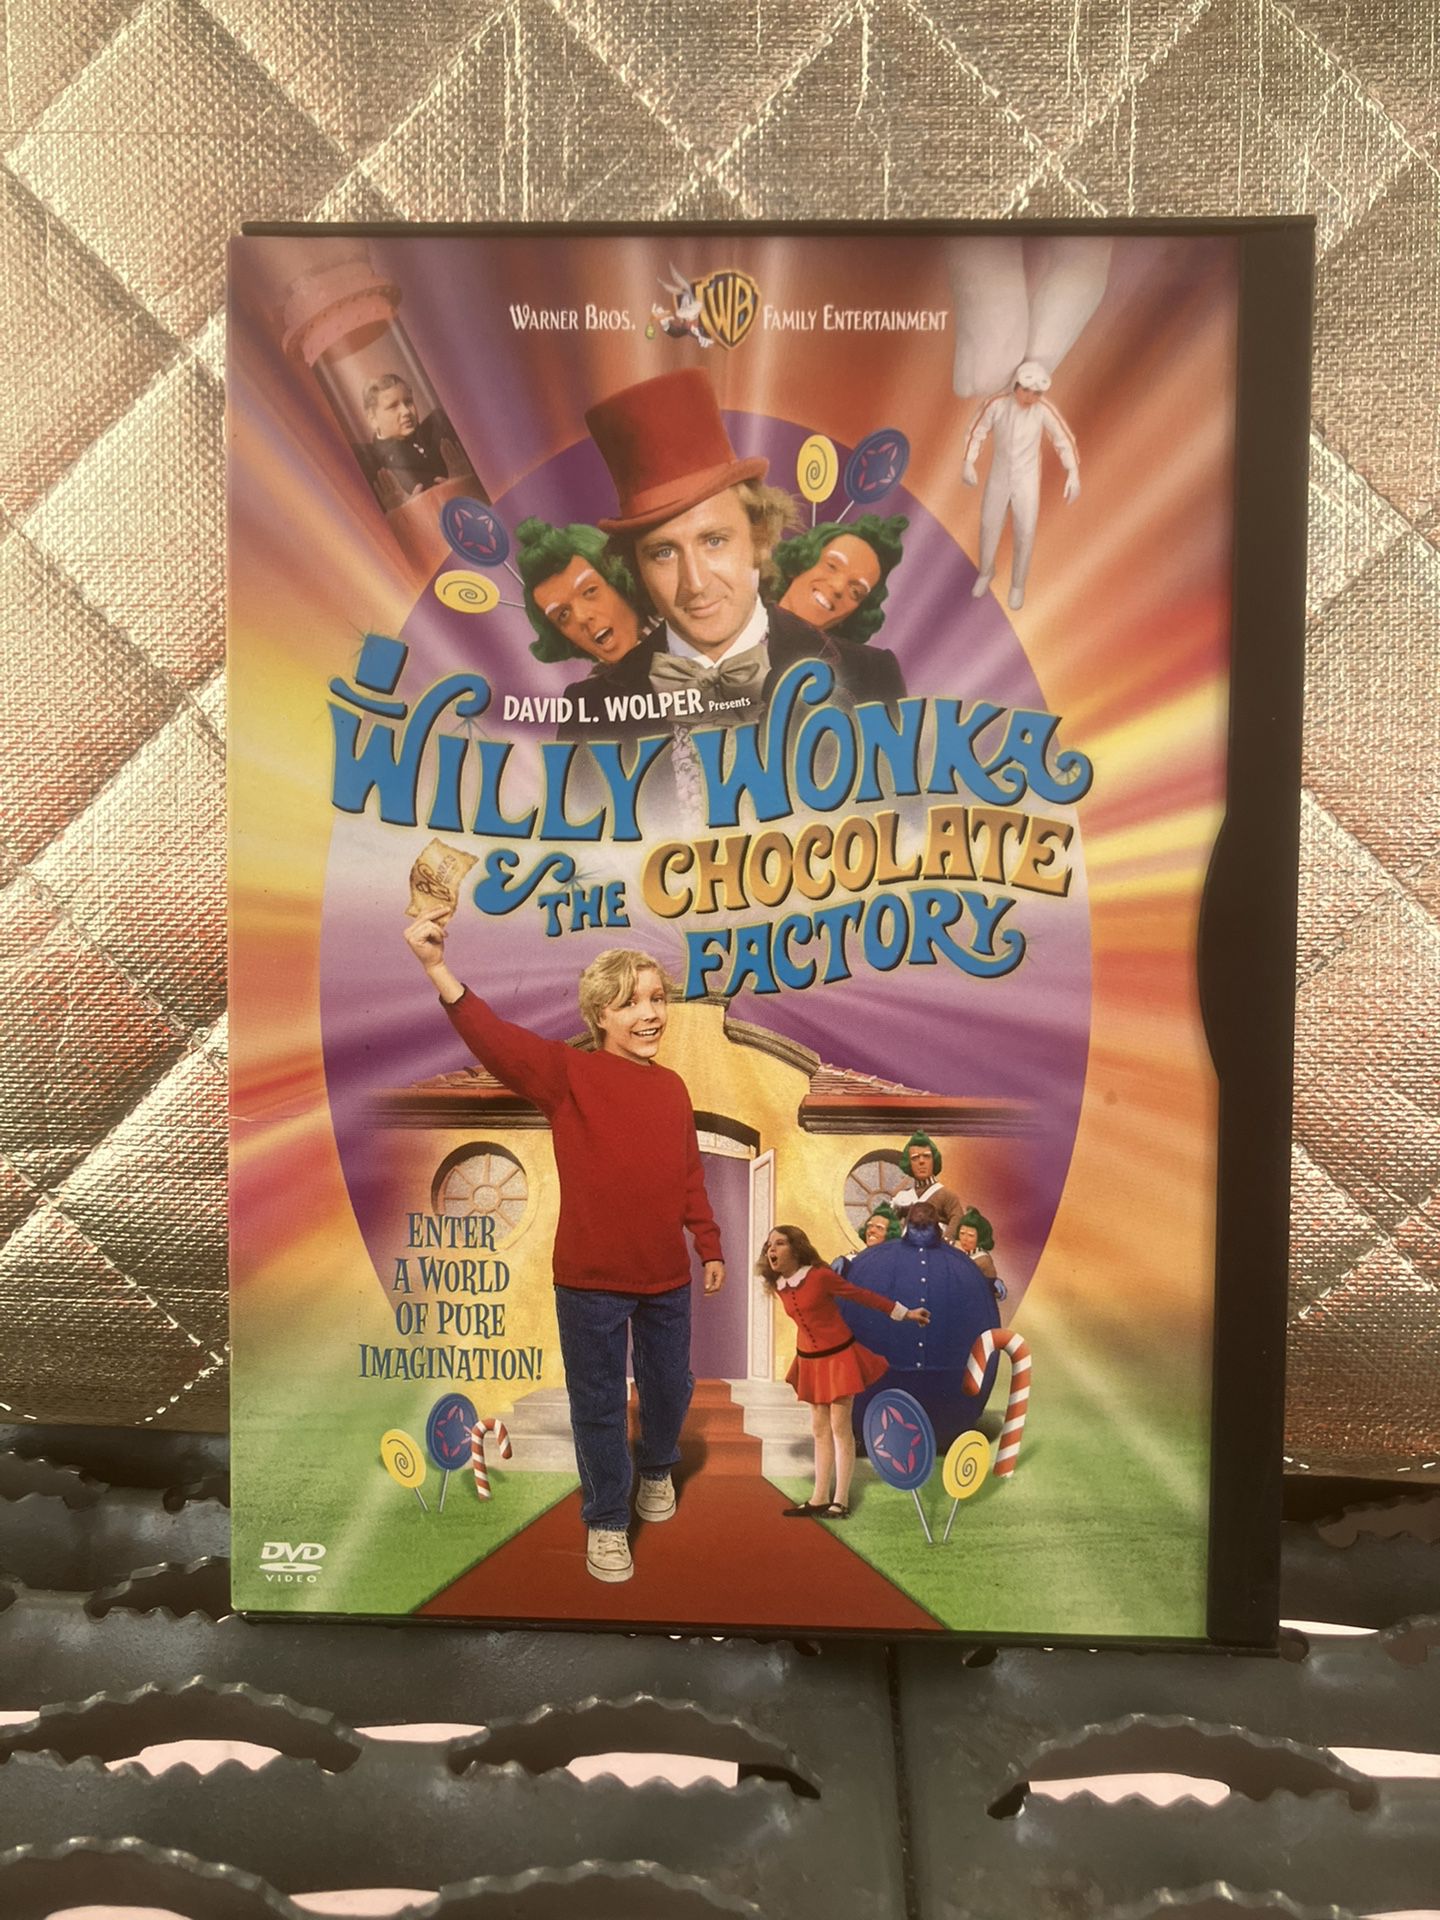 Willy Wonka & The Chocolate Factory (DVD) 